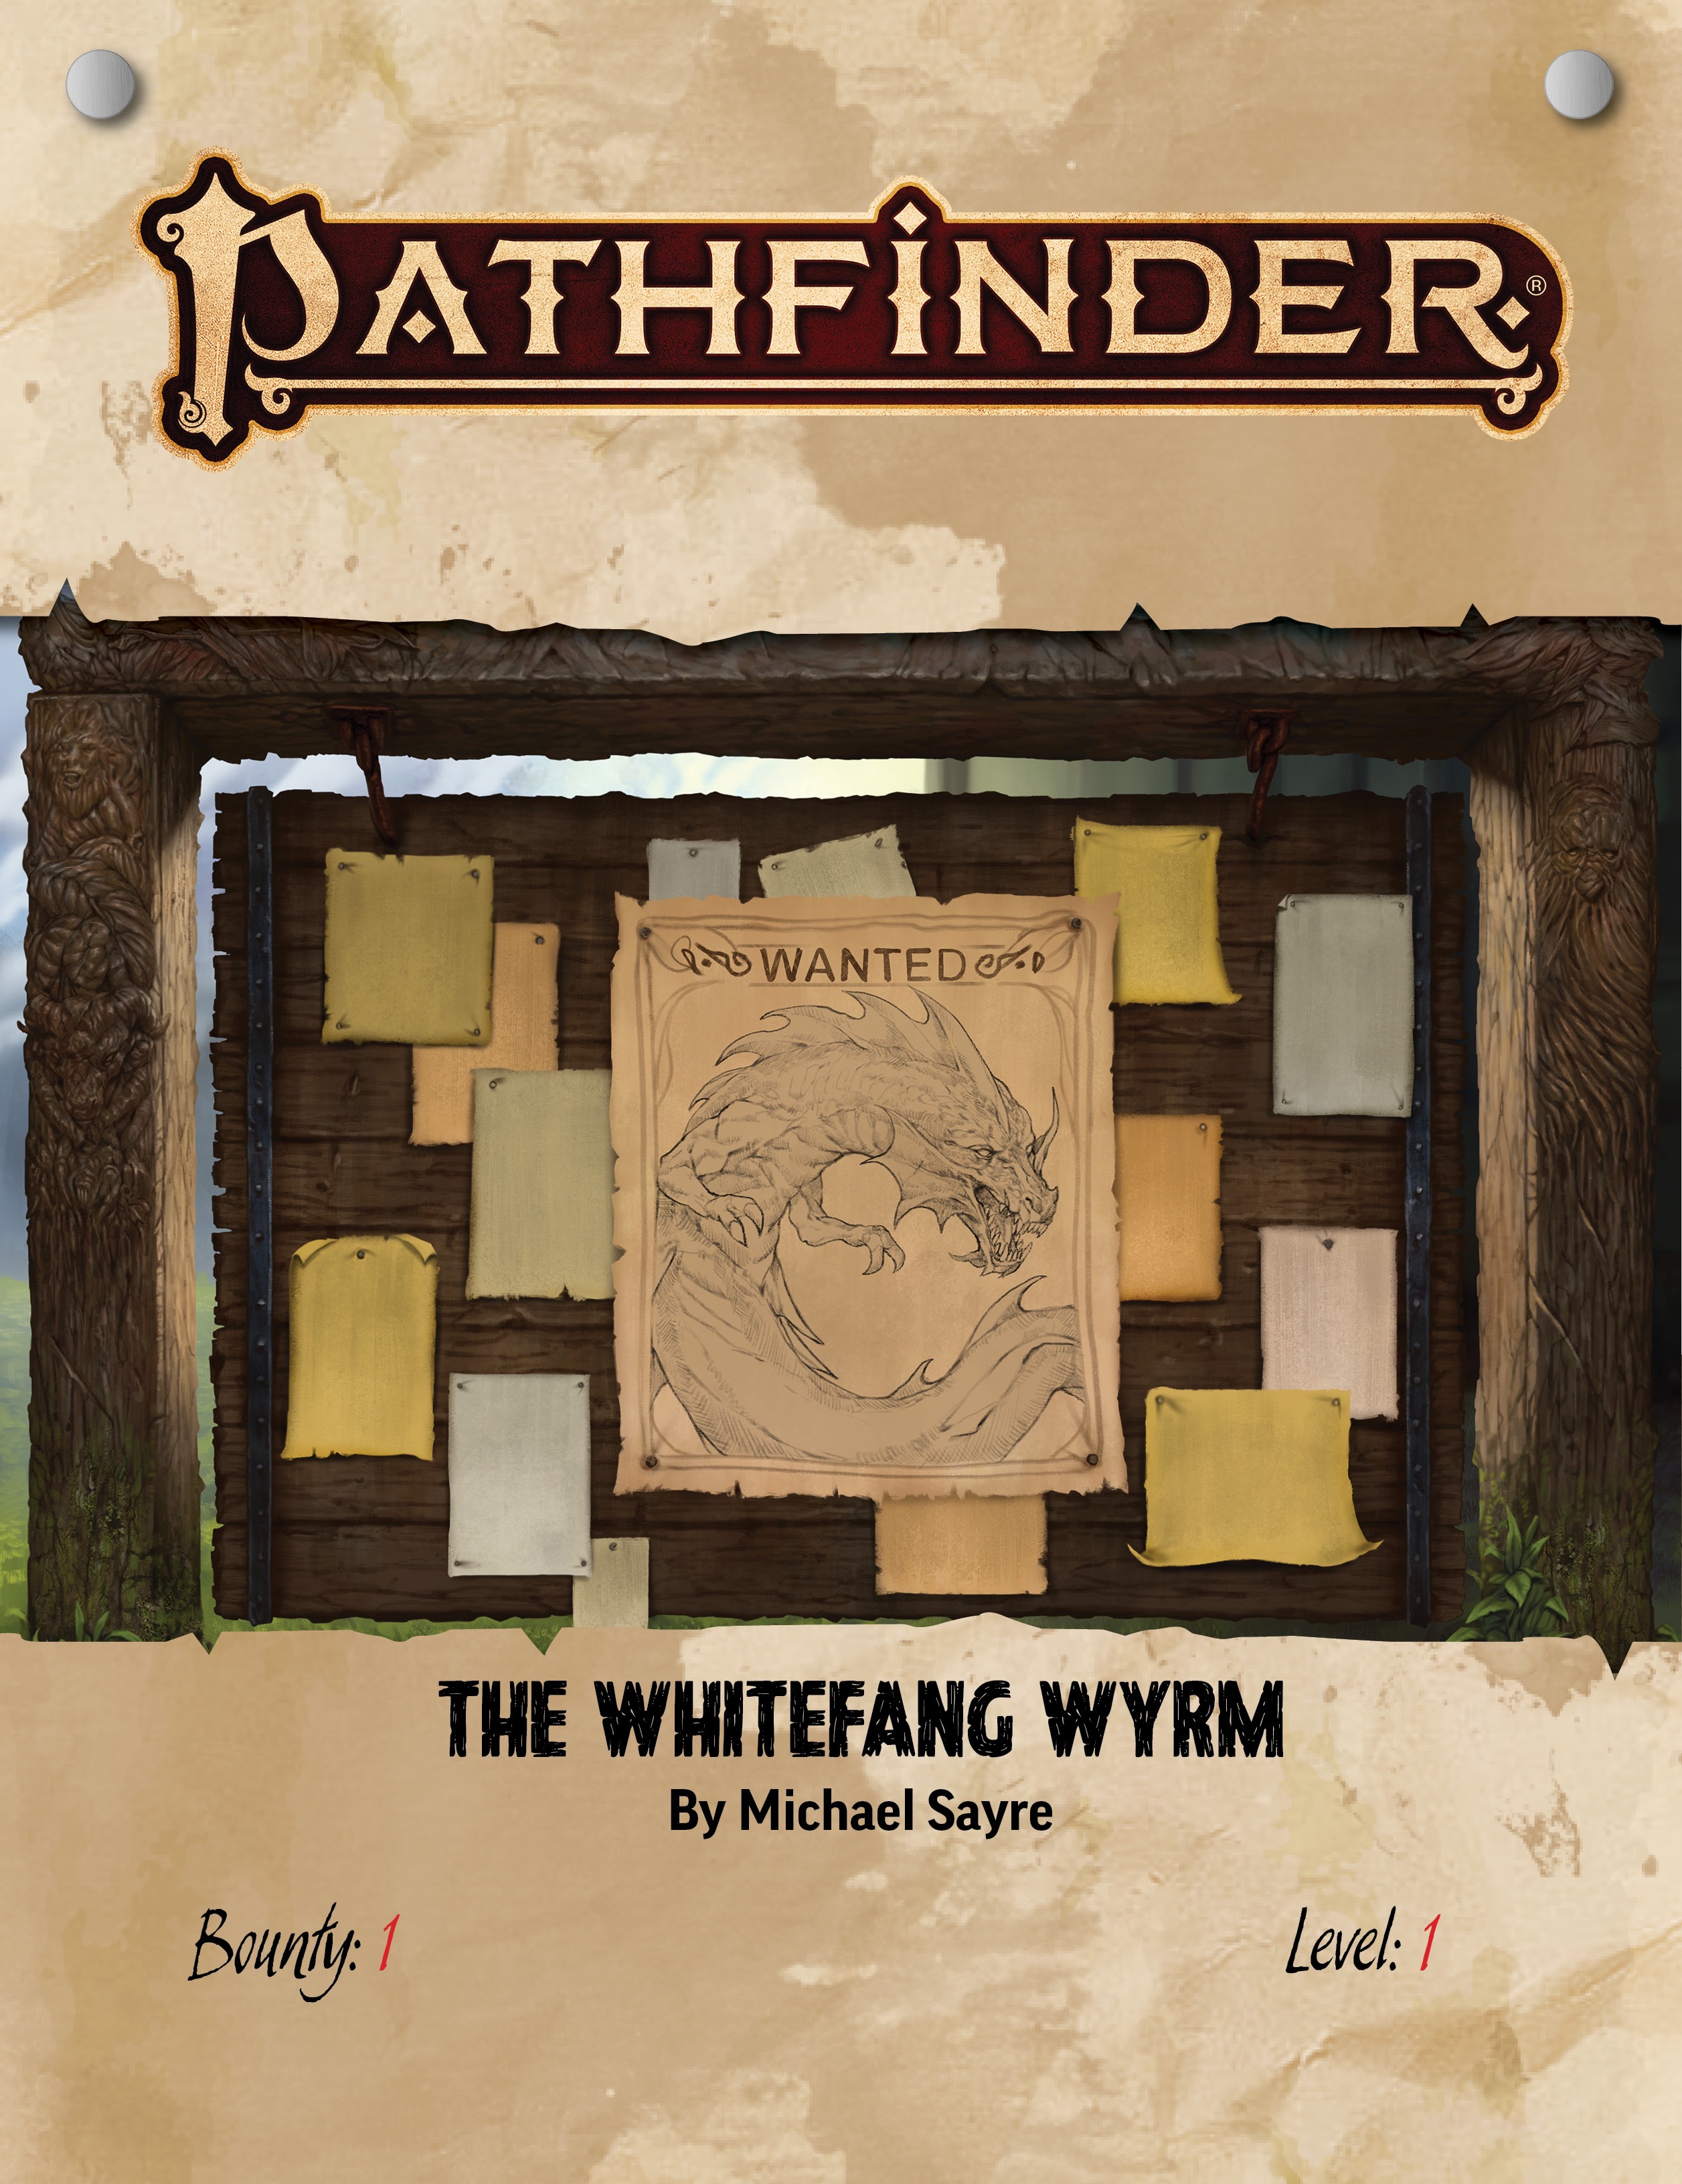 A wooden sign board with a Wanted poster of a whitefang wyrm